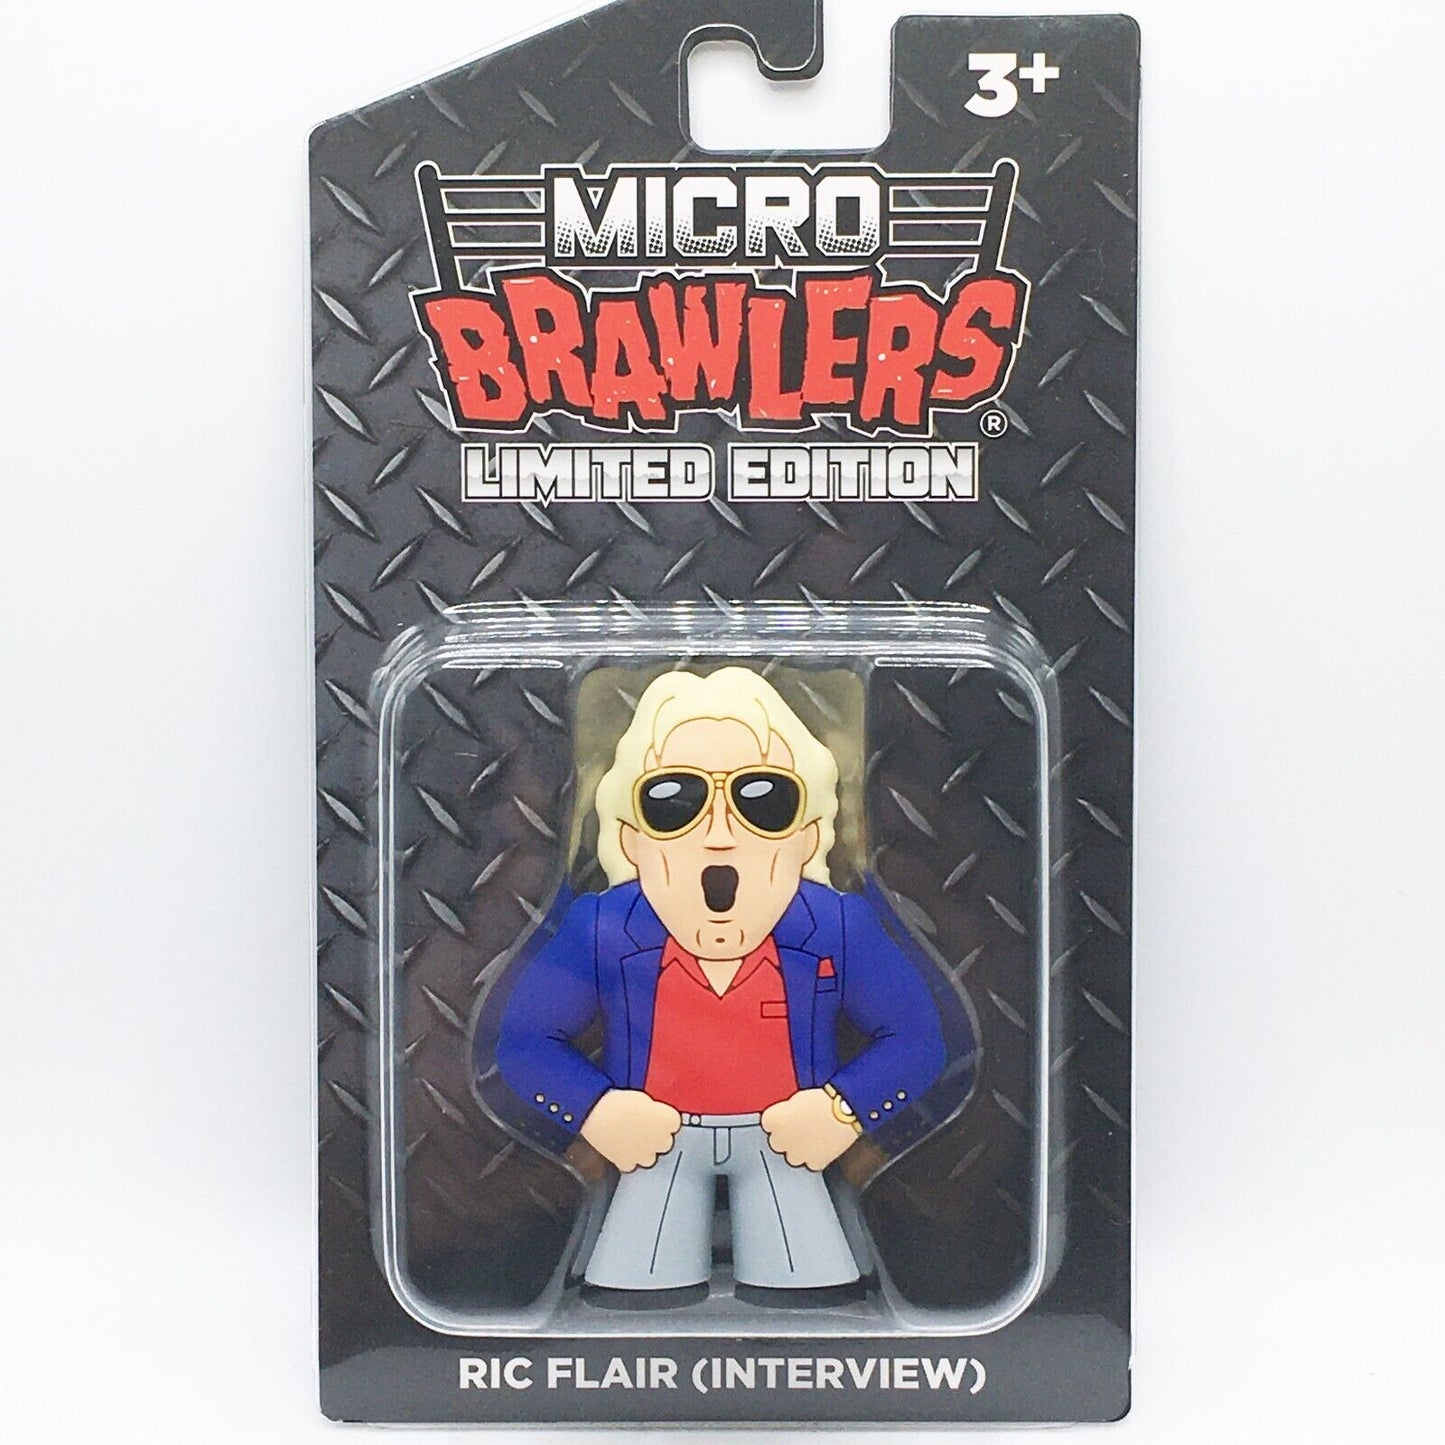 2022 Pro Wrestling Tees Micro Brawlers Limited Edition Ric Flair [Interview]